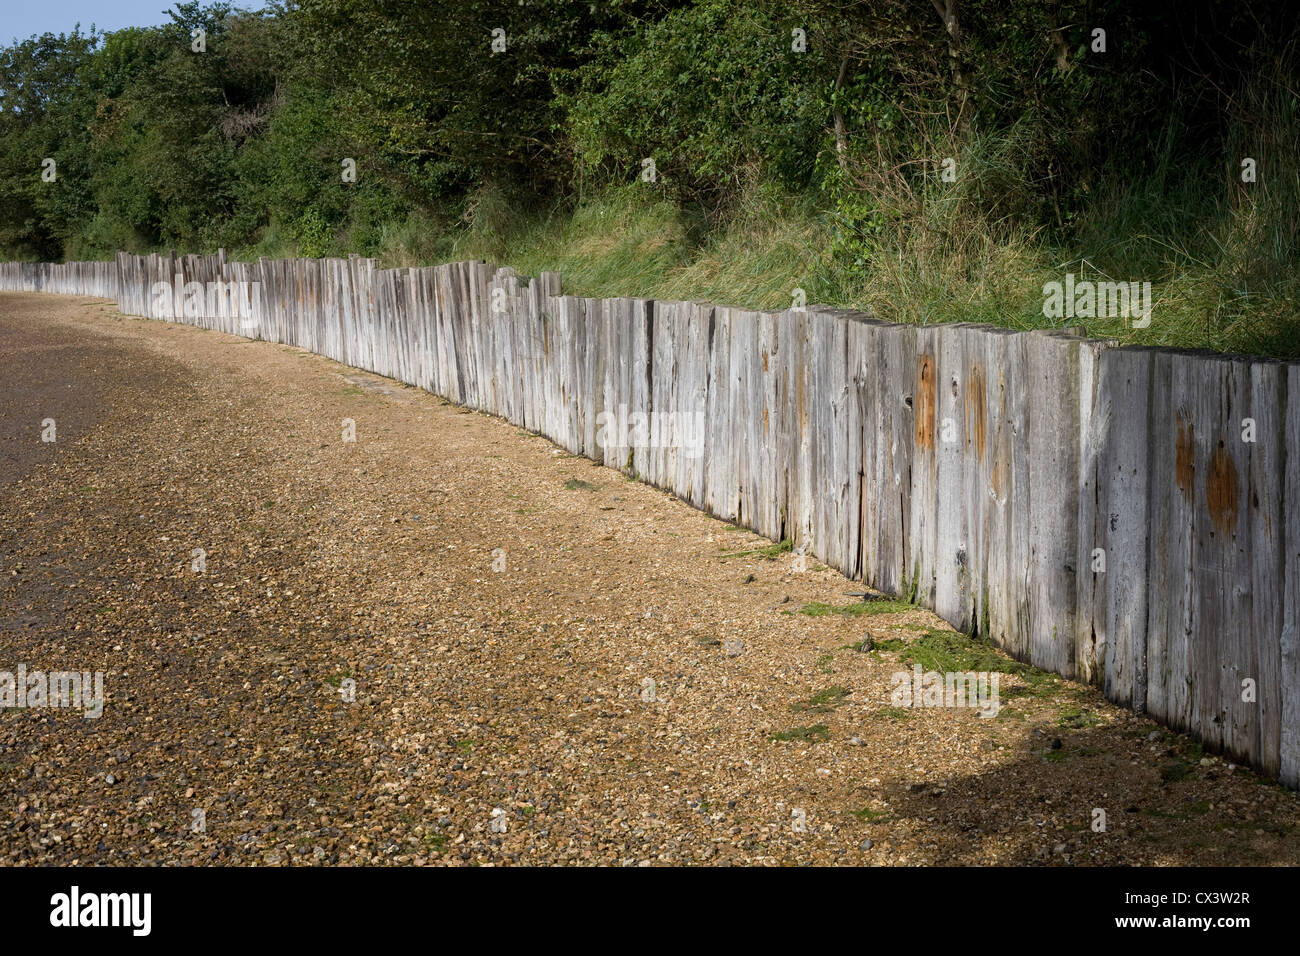 pebble beach at Langstone, Havant, with old railway sleepers as wall Stock Photo